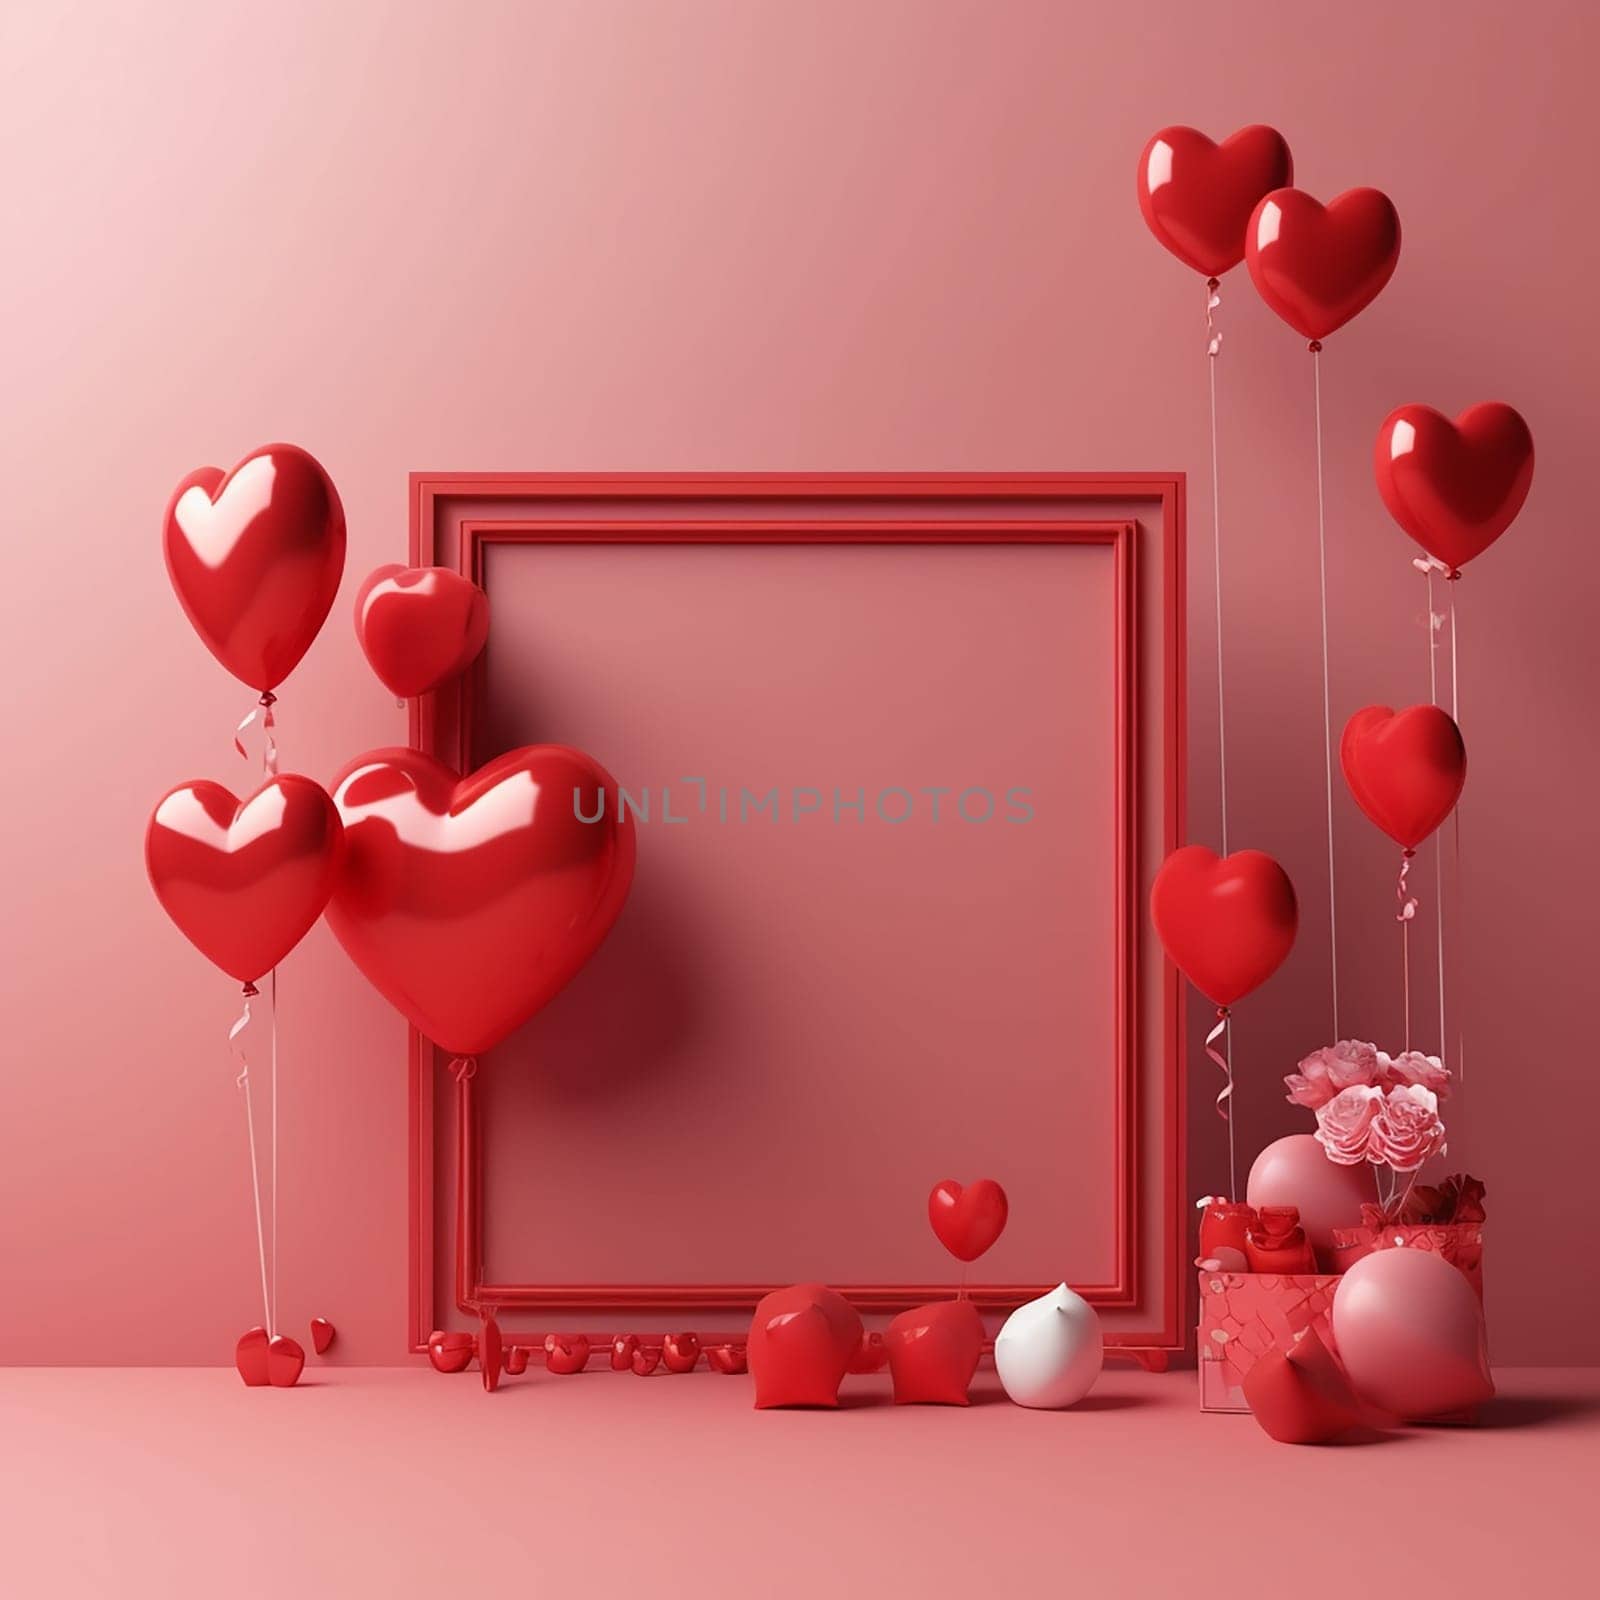 Assortment of red and pink heart-shaped balloons and decorations on a pink background.